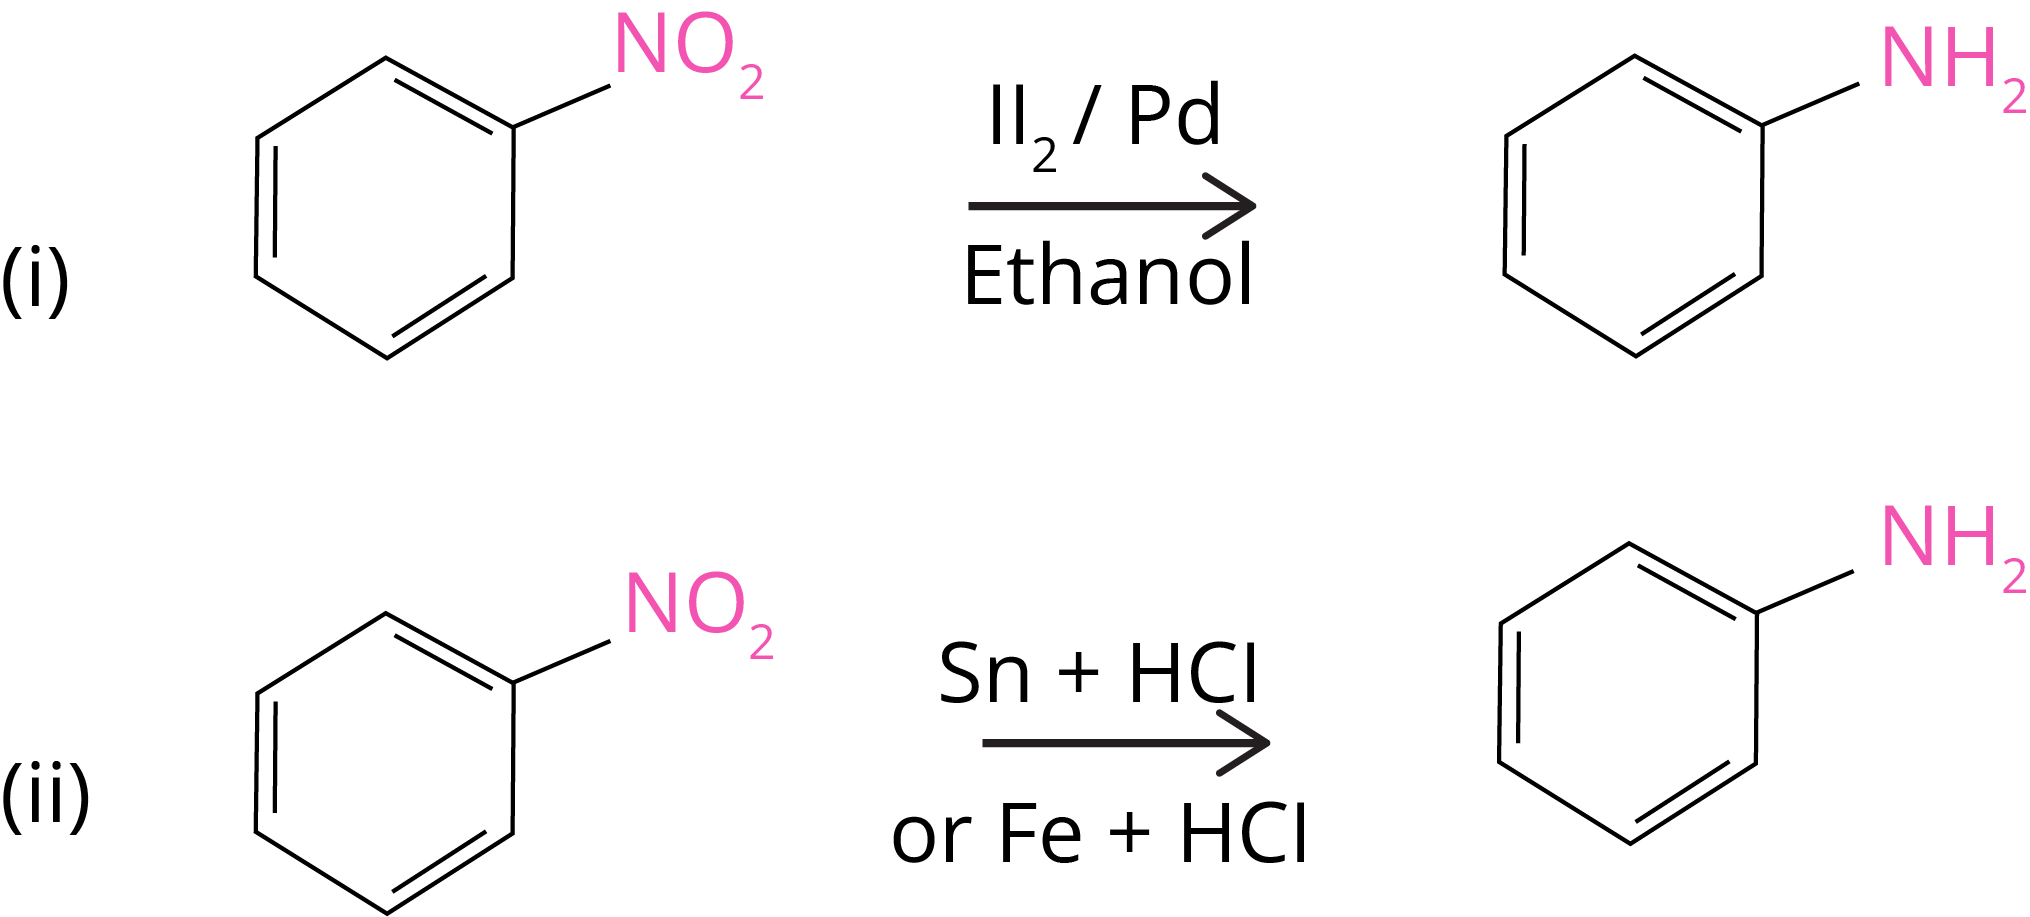 Reduction of Nitro Compounds